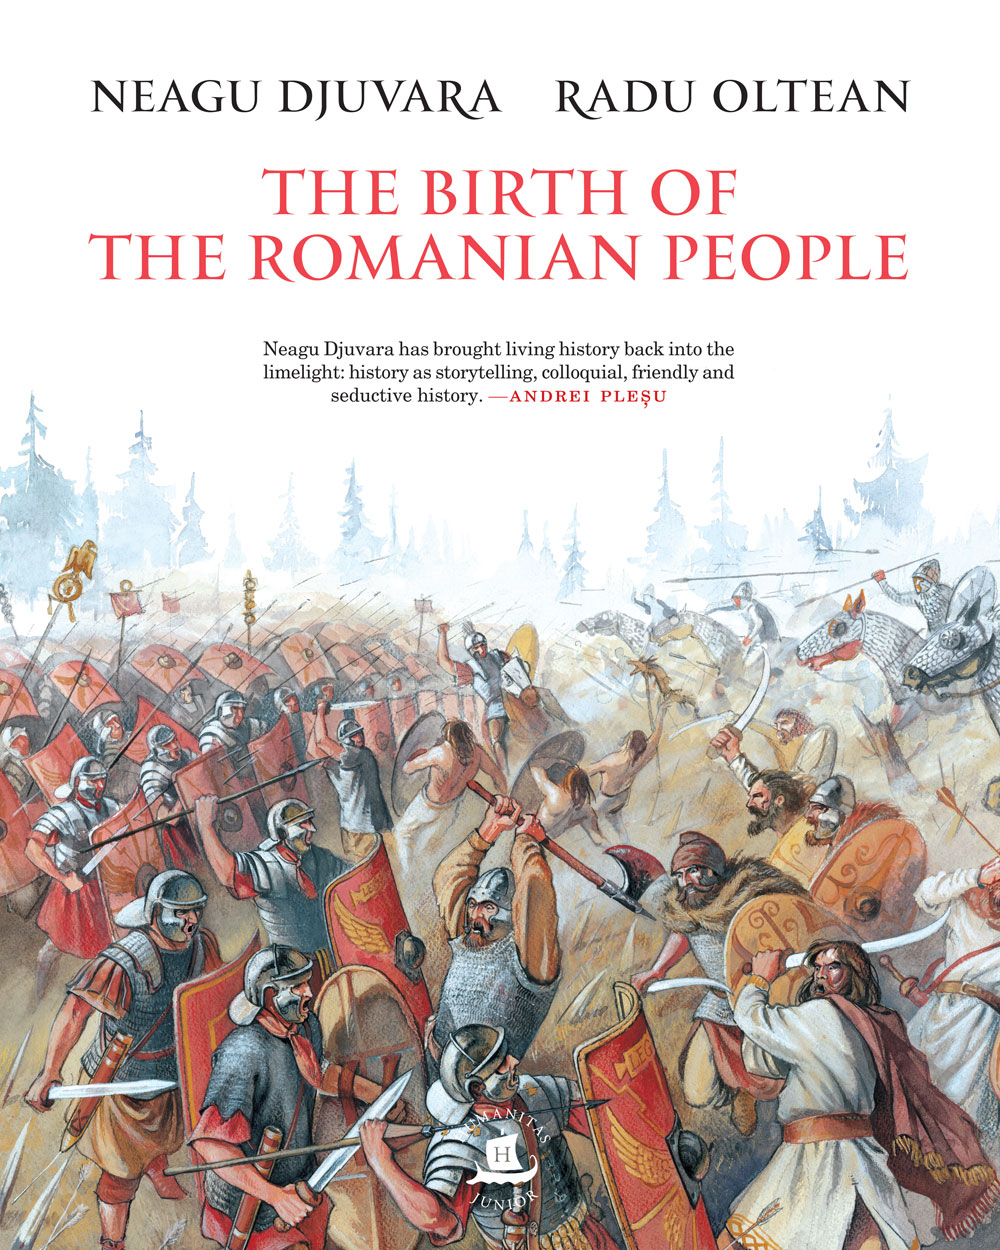 The Birth of the Romanian People